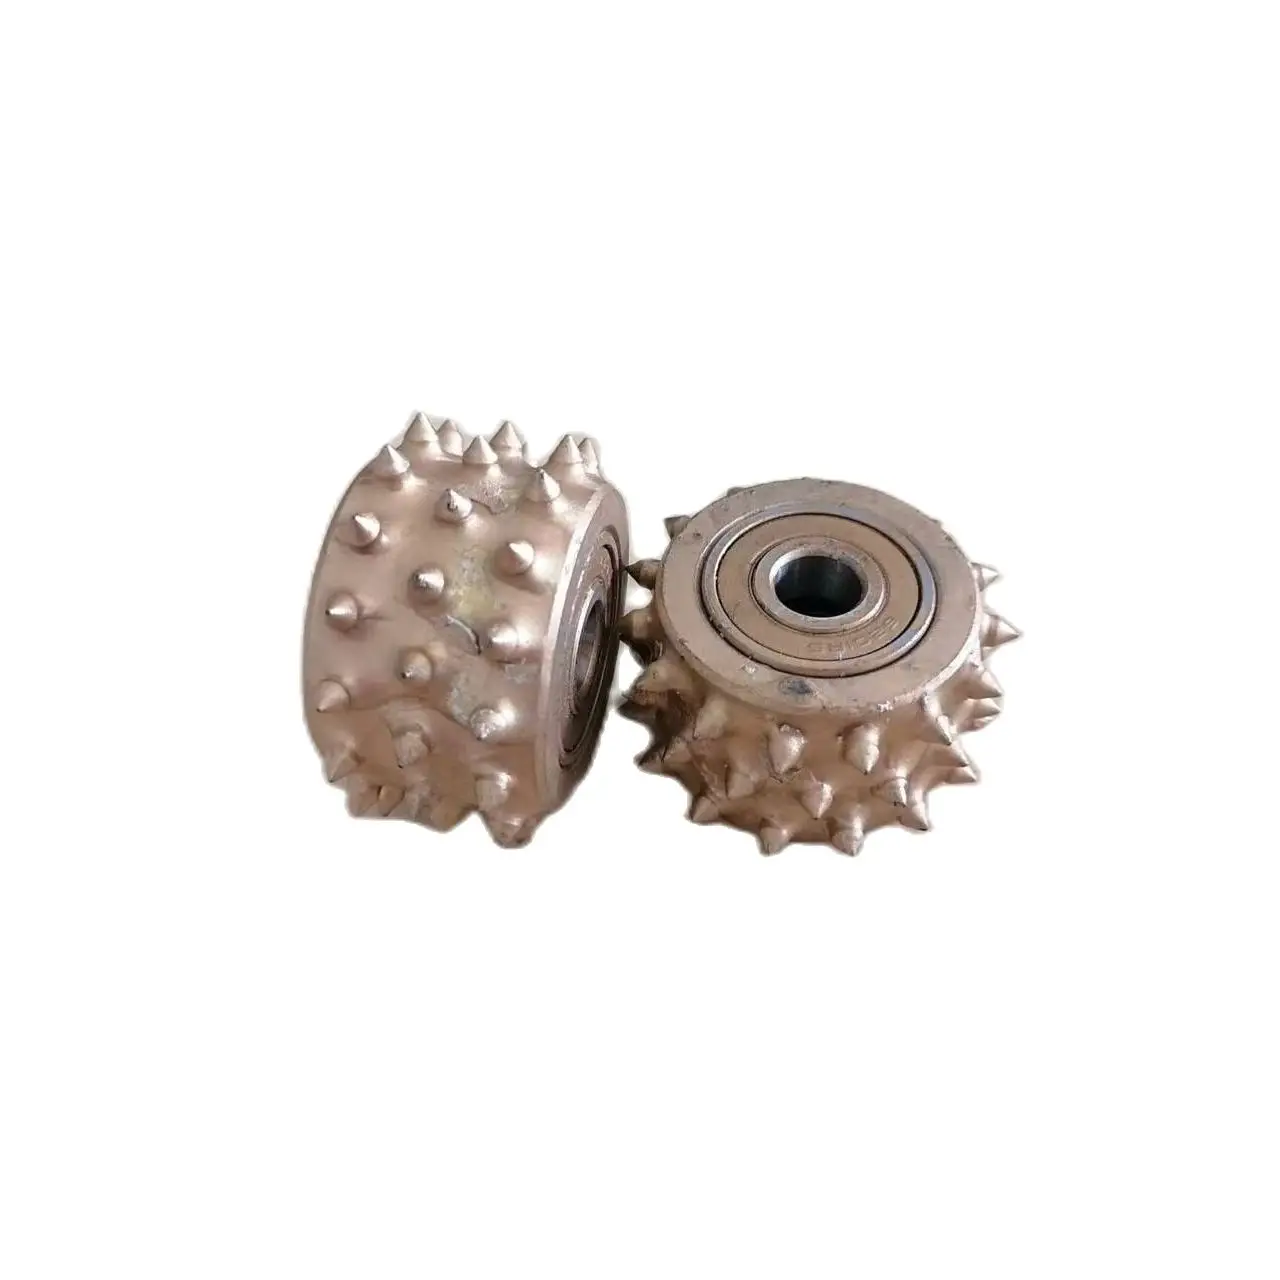 Abrasive Diamond Bush Hammer 45 Teeth Wheel For Granite Marble Litchi Surface And For Exterior Tiles And Floor Stone